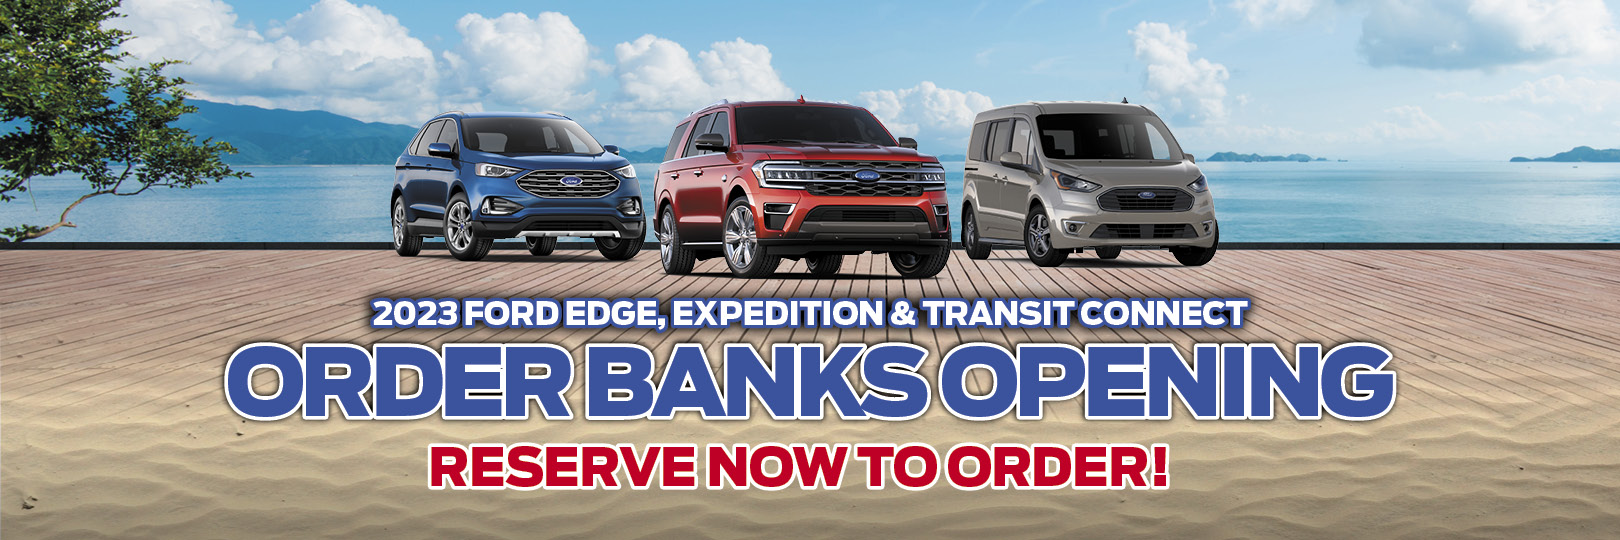 Reserve to Order Ford Expedition Edge Transit